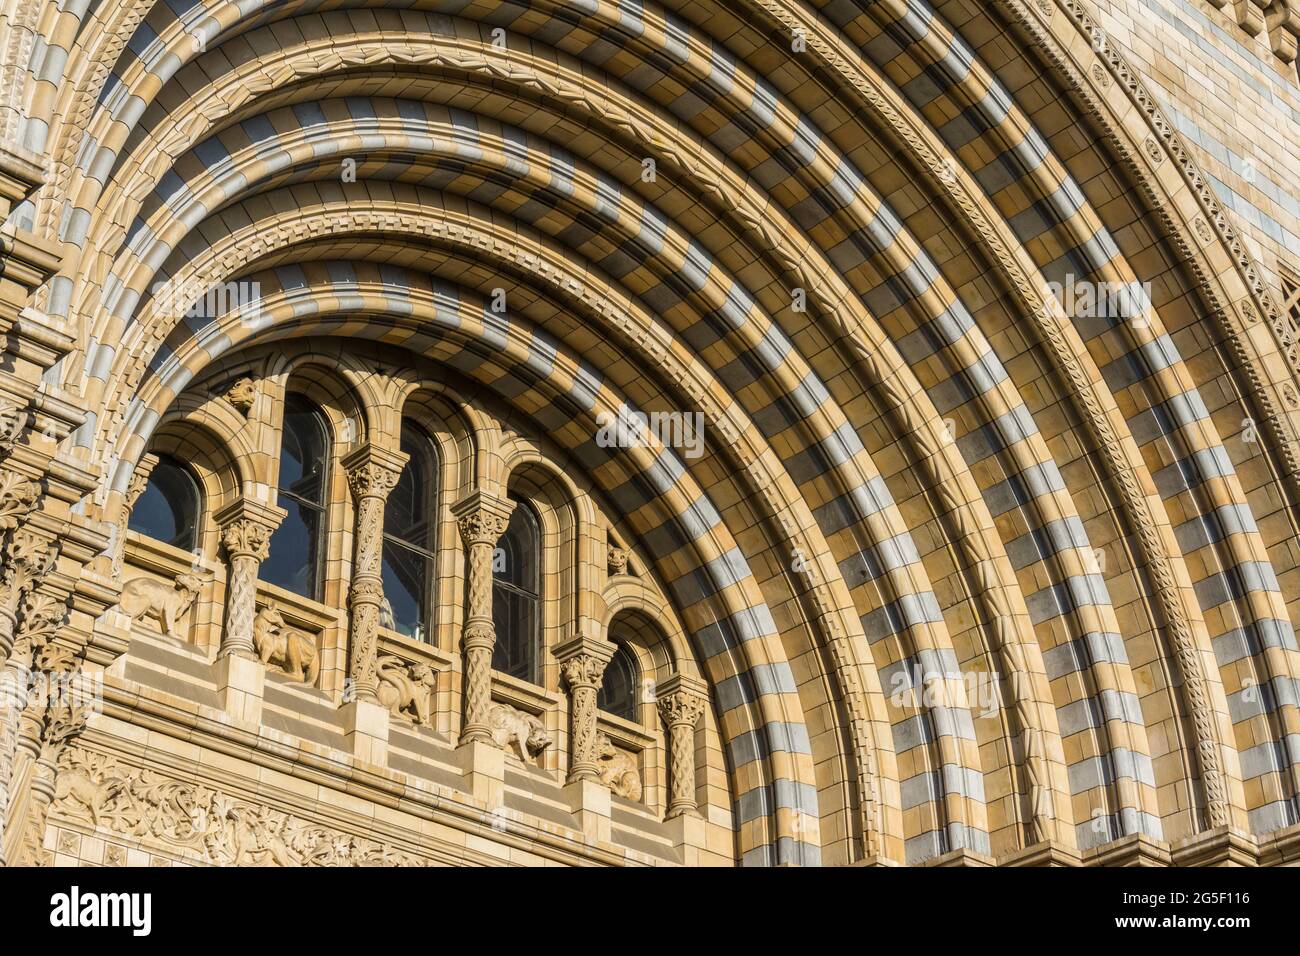 Close up detail of the terracotta front facade of the Natural History Museum, Kensington, London. Stock Photo